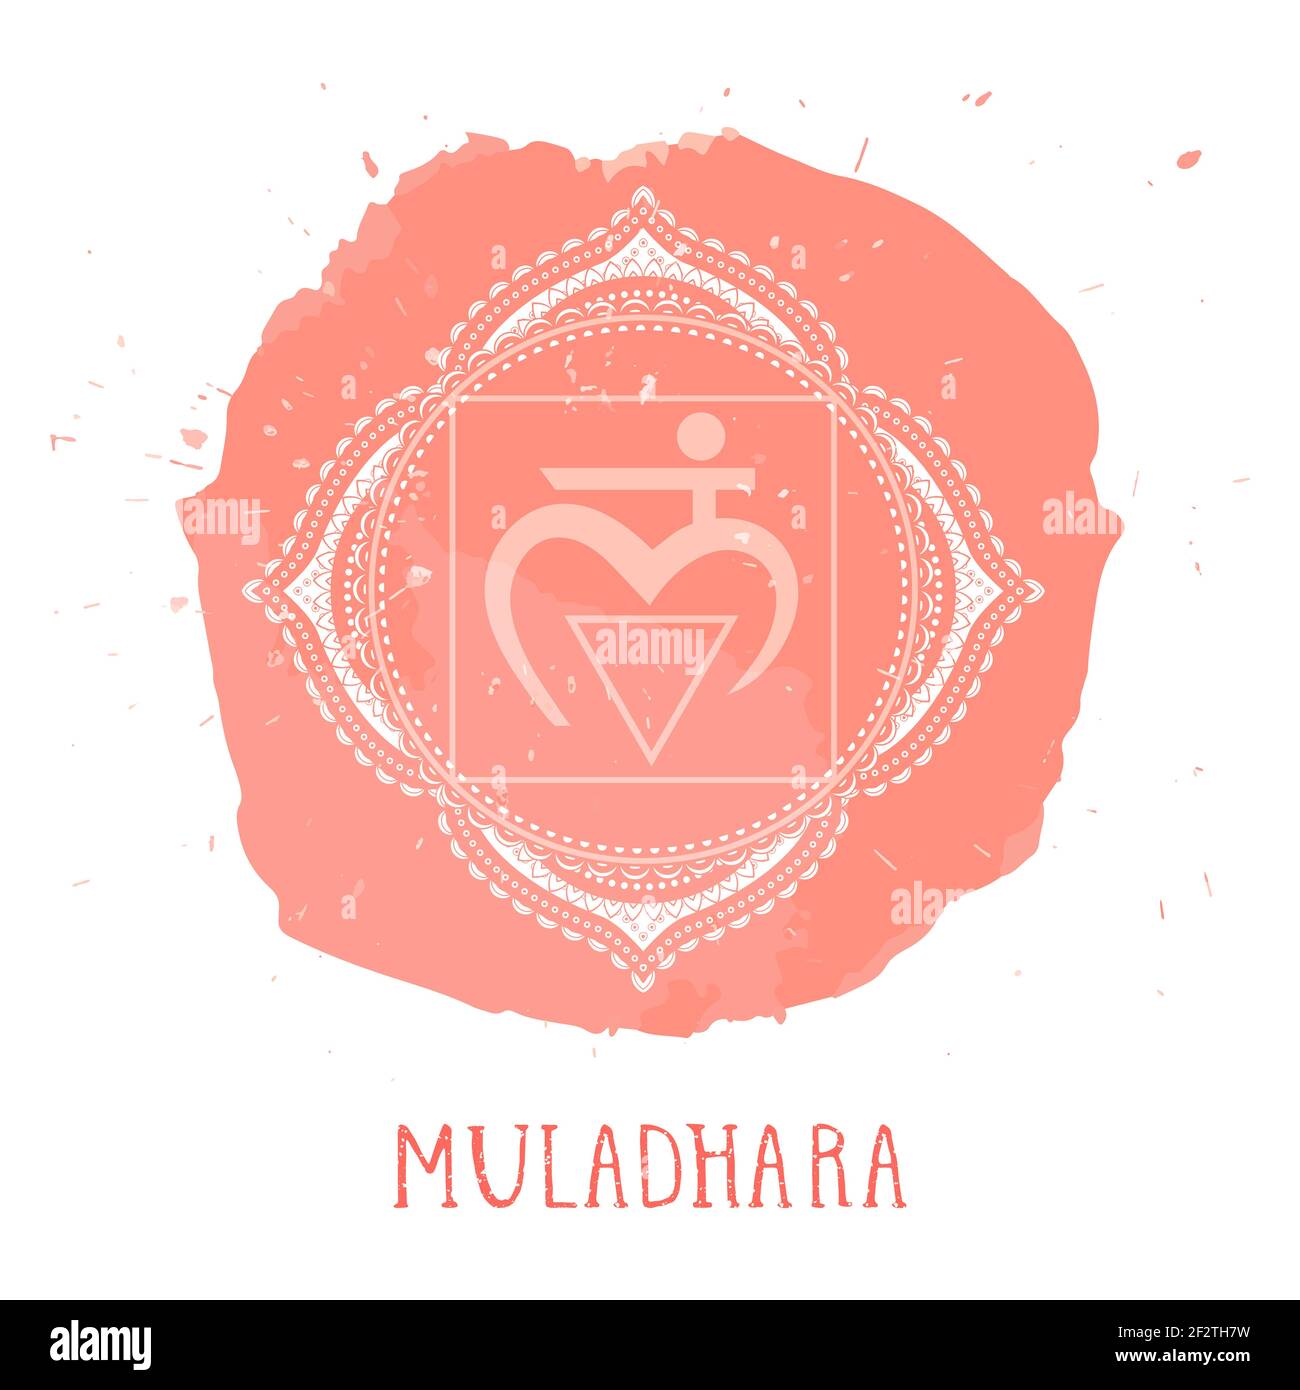 Vector illustration with symbol Muladhara - Root chakra and watercolor element on white background. Circle mandala pattern and hand drawn lettering. C Stock Vector